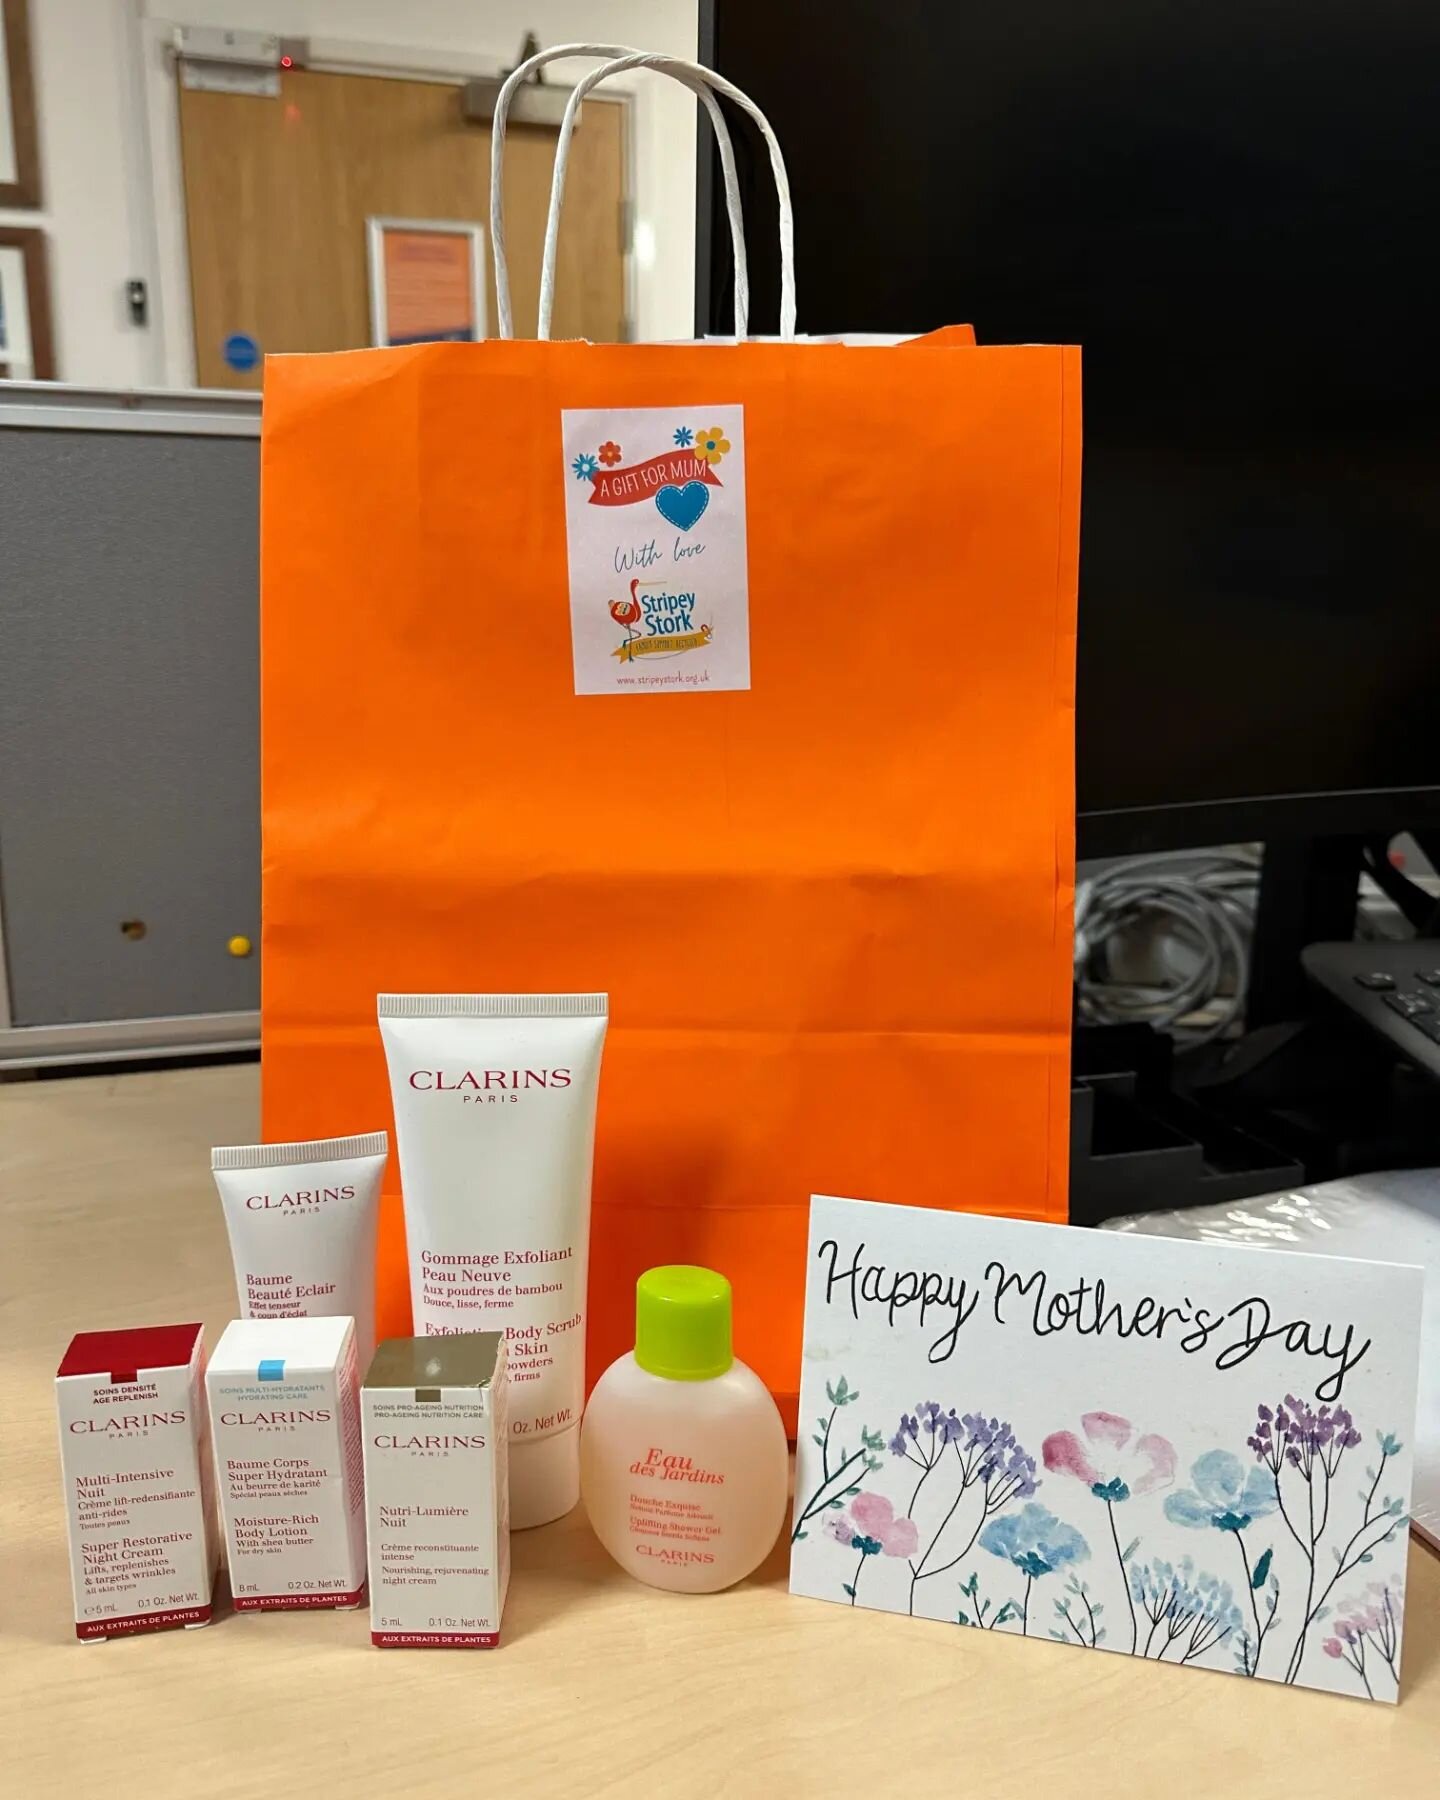 Happy Mother's Day 💖 Thank you to @stripeystork for the generous 'Gifts for Mums' donation on this Mother's Day. Your support brings joy to the hearts of mums in need in our community. 💕

@oasischarityuk 

#happymothersday #mothersday #mothersdaygi